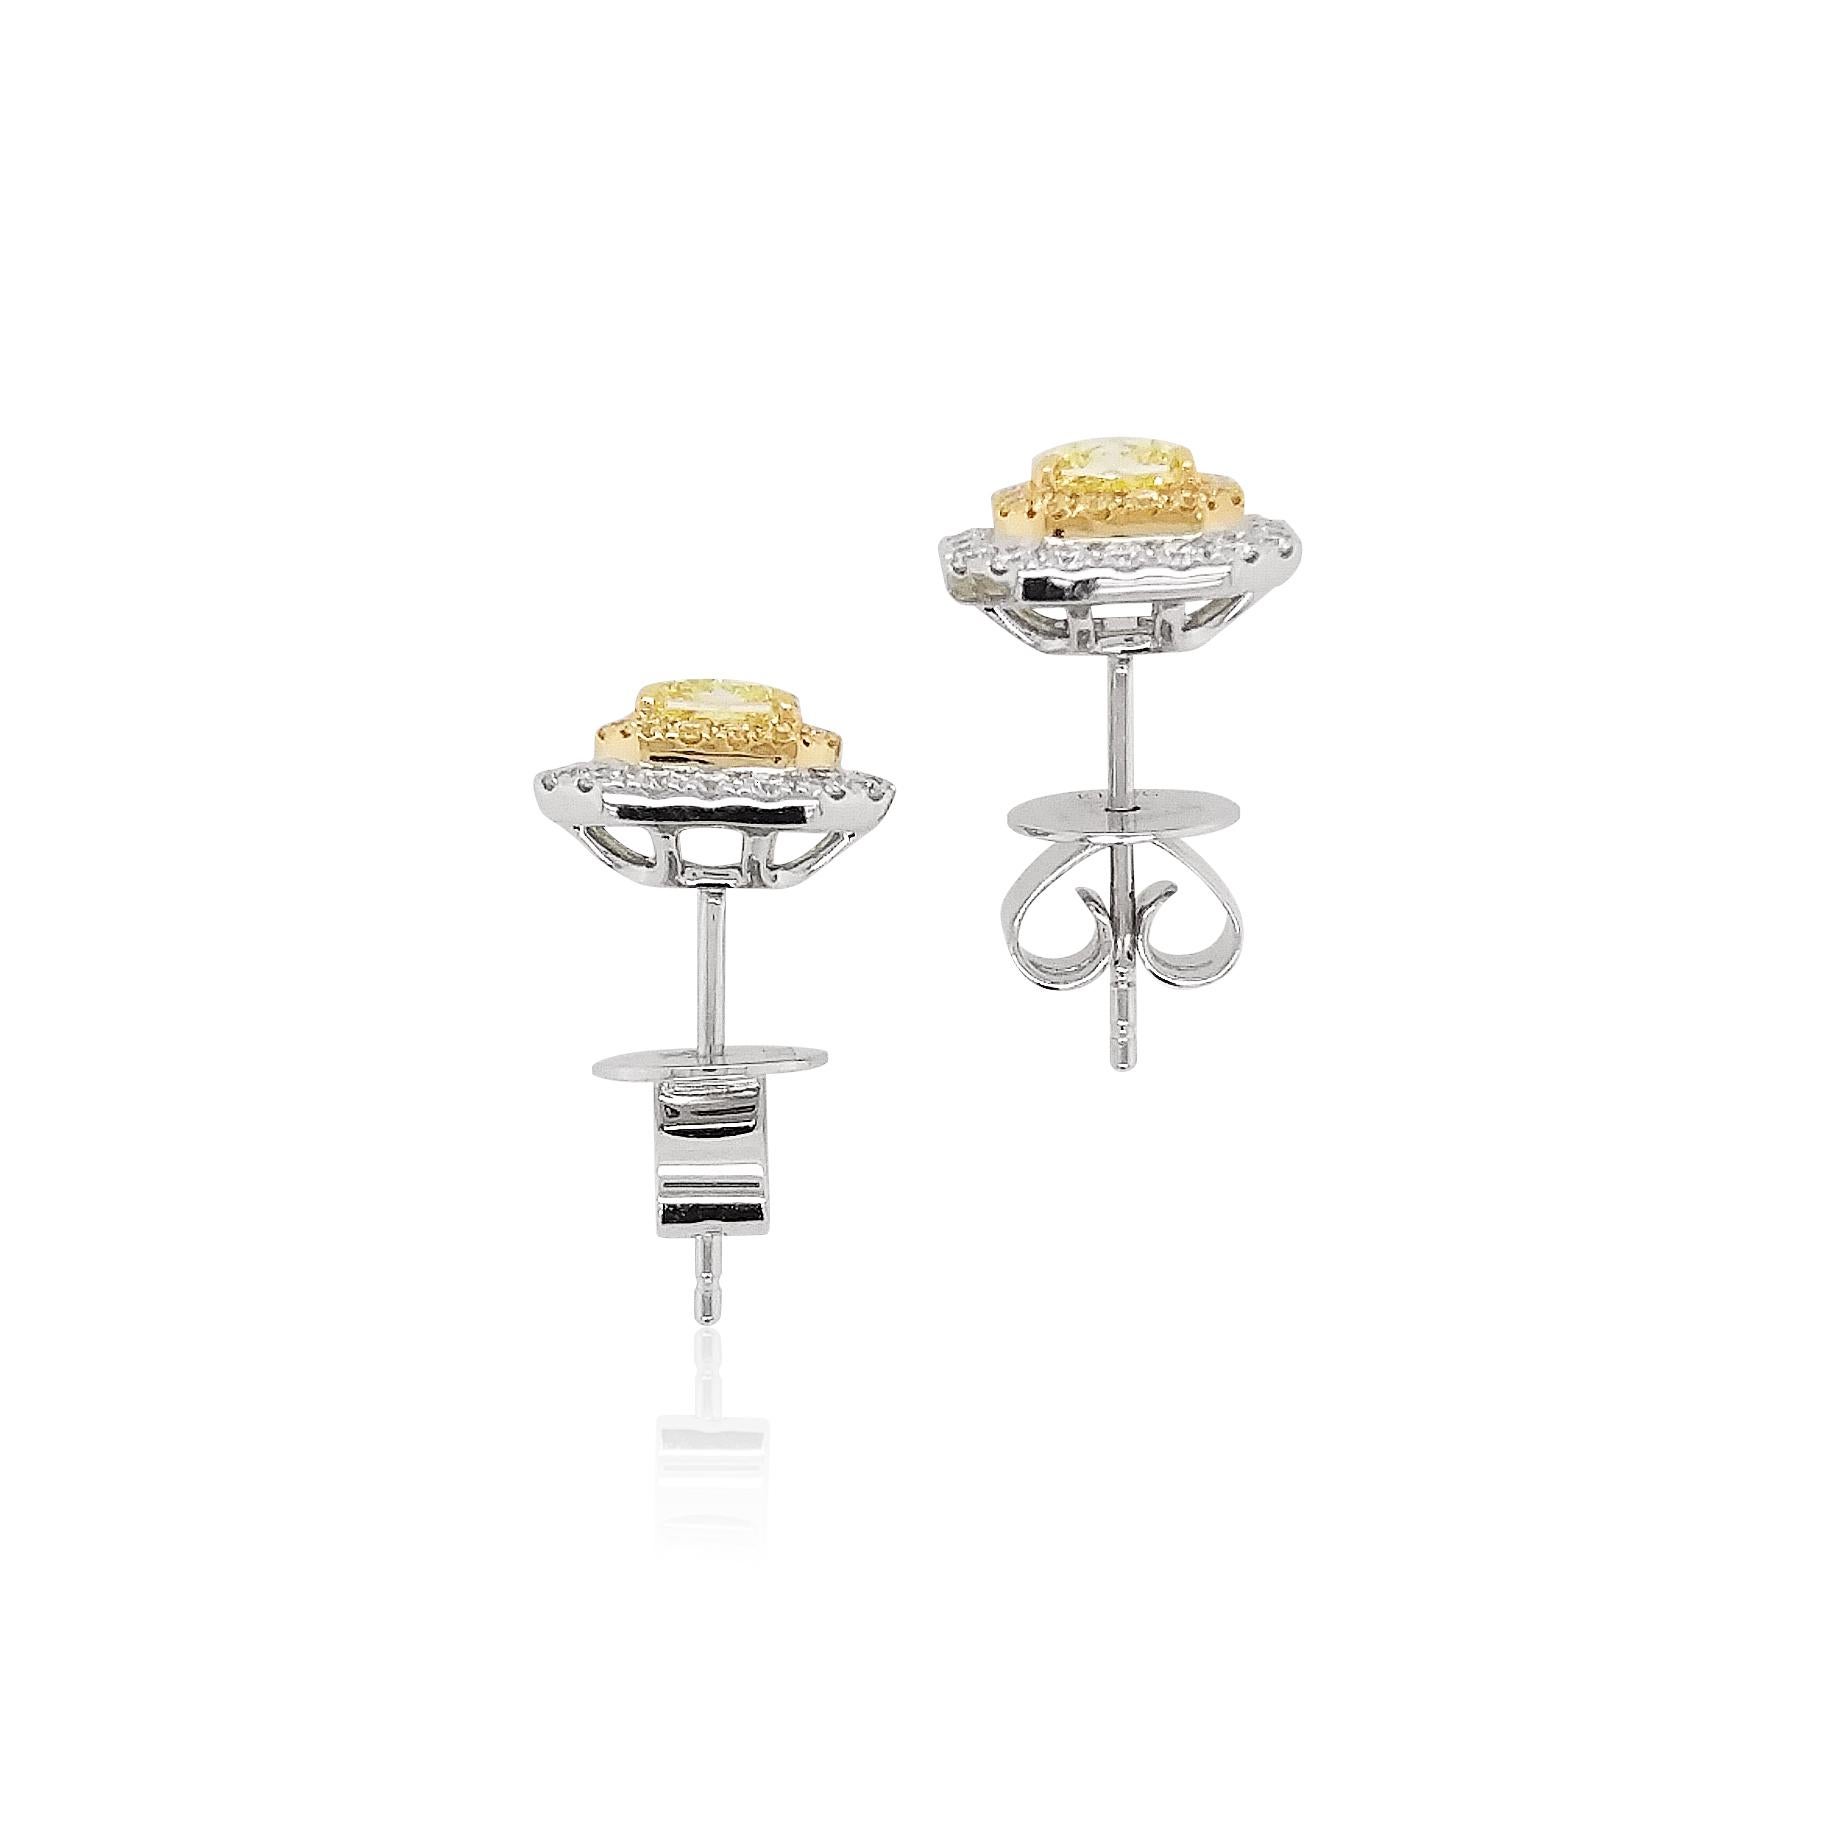 These magnificent 18 Karat gold stud earrings are featured by GIA certified natural Fancy Yellow Diamonds and White Diamonds. Each diamond has been selected for their superior lustre and striking color, and they are easy to transition from day to